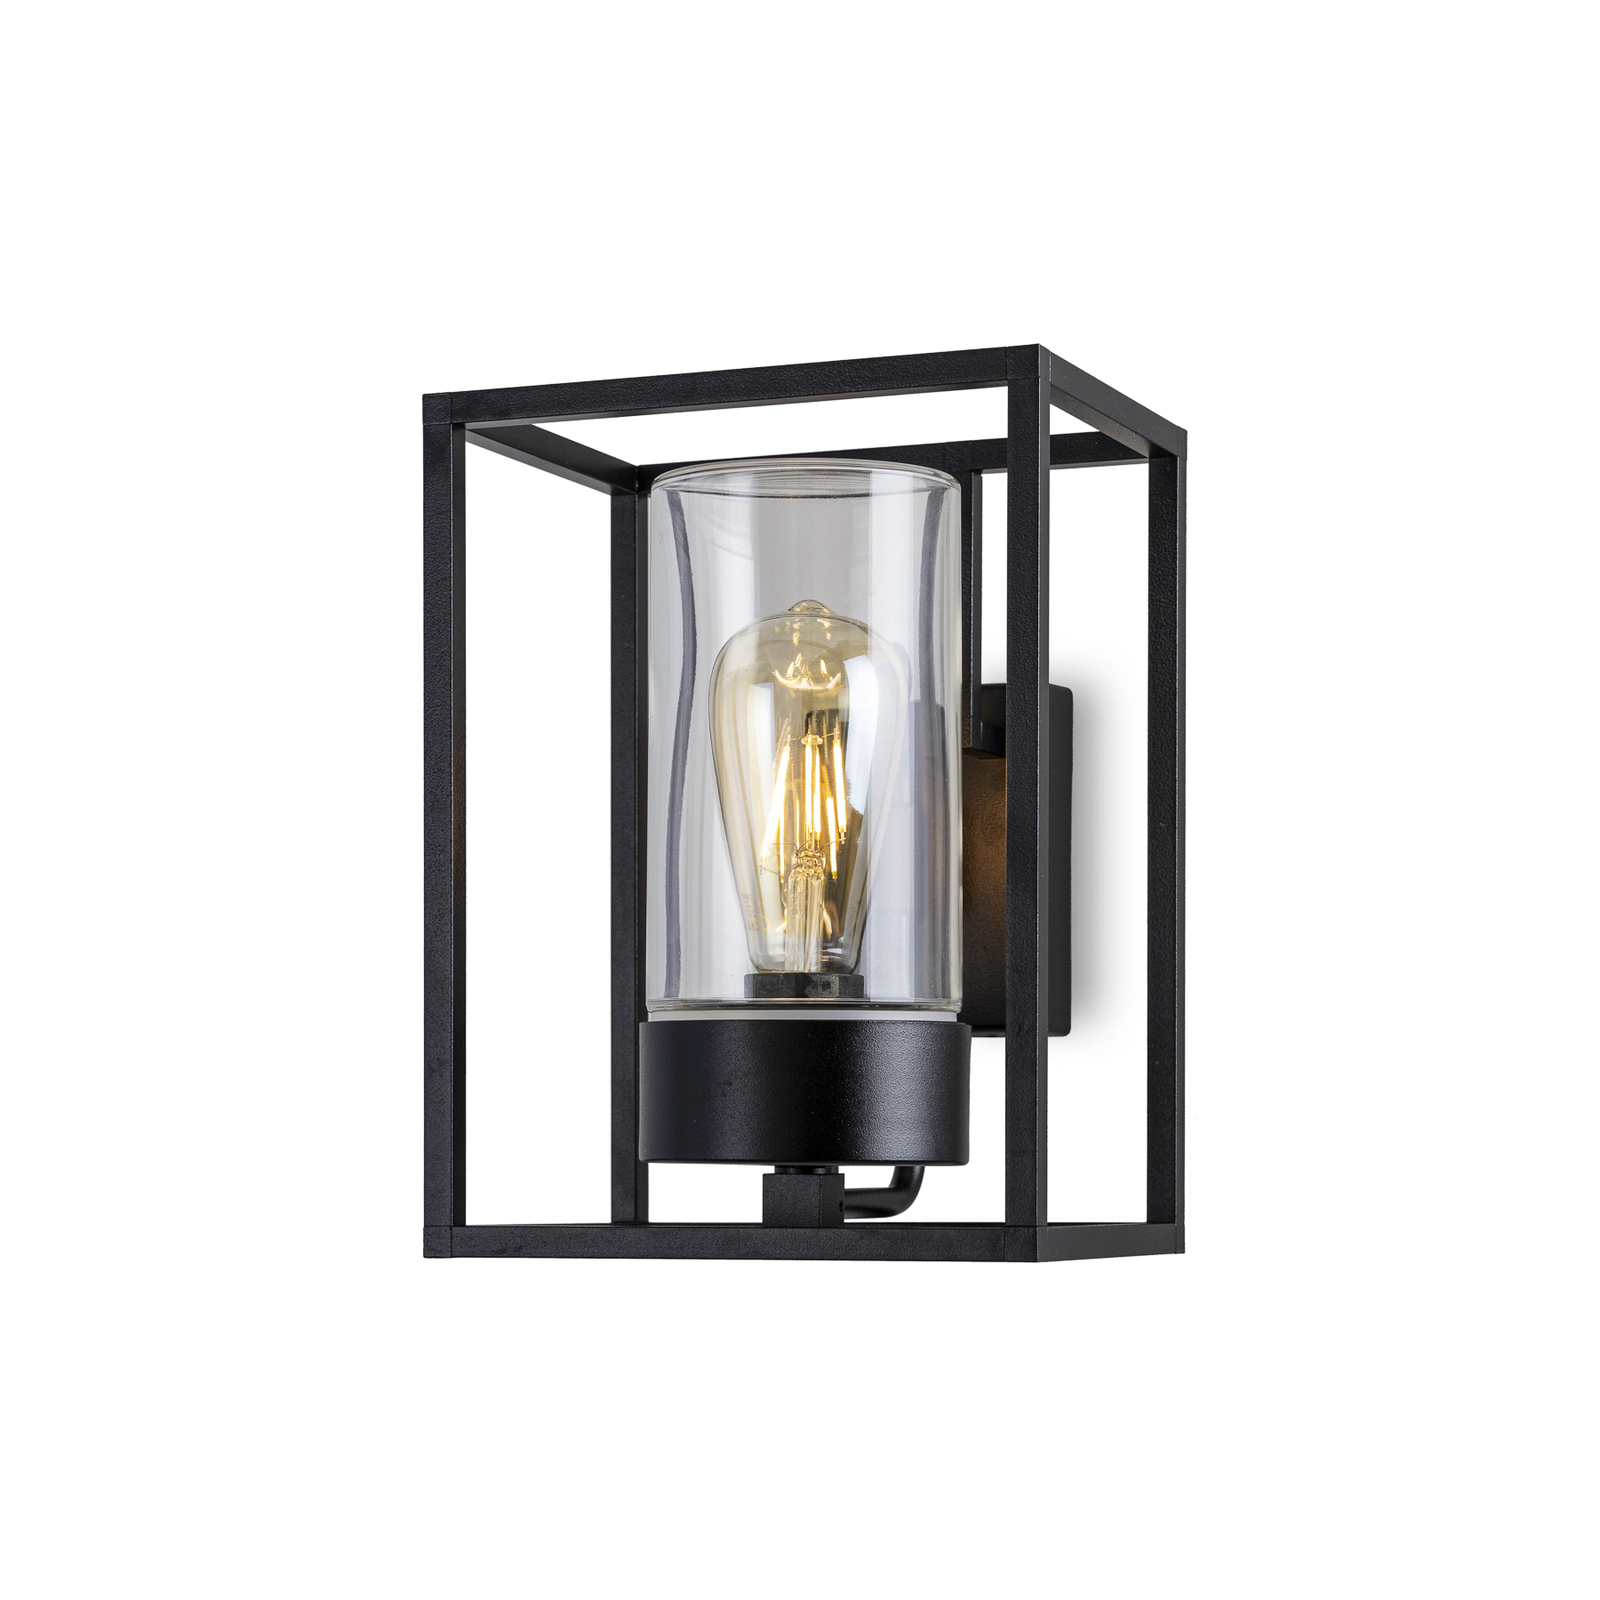 Cubic³ 3363 outdoor wall light, black/clear